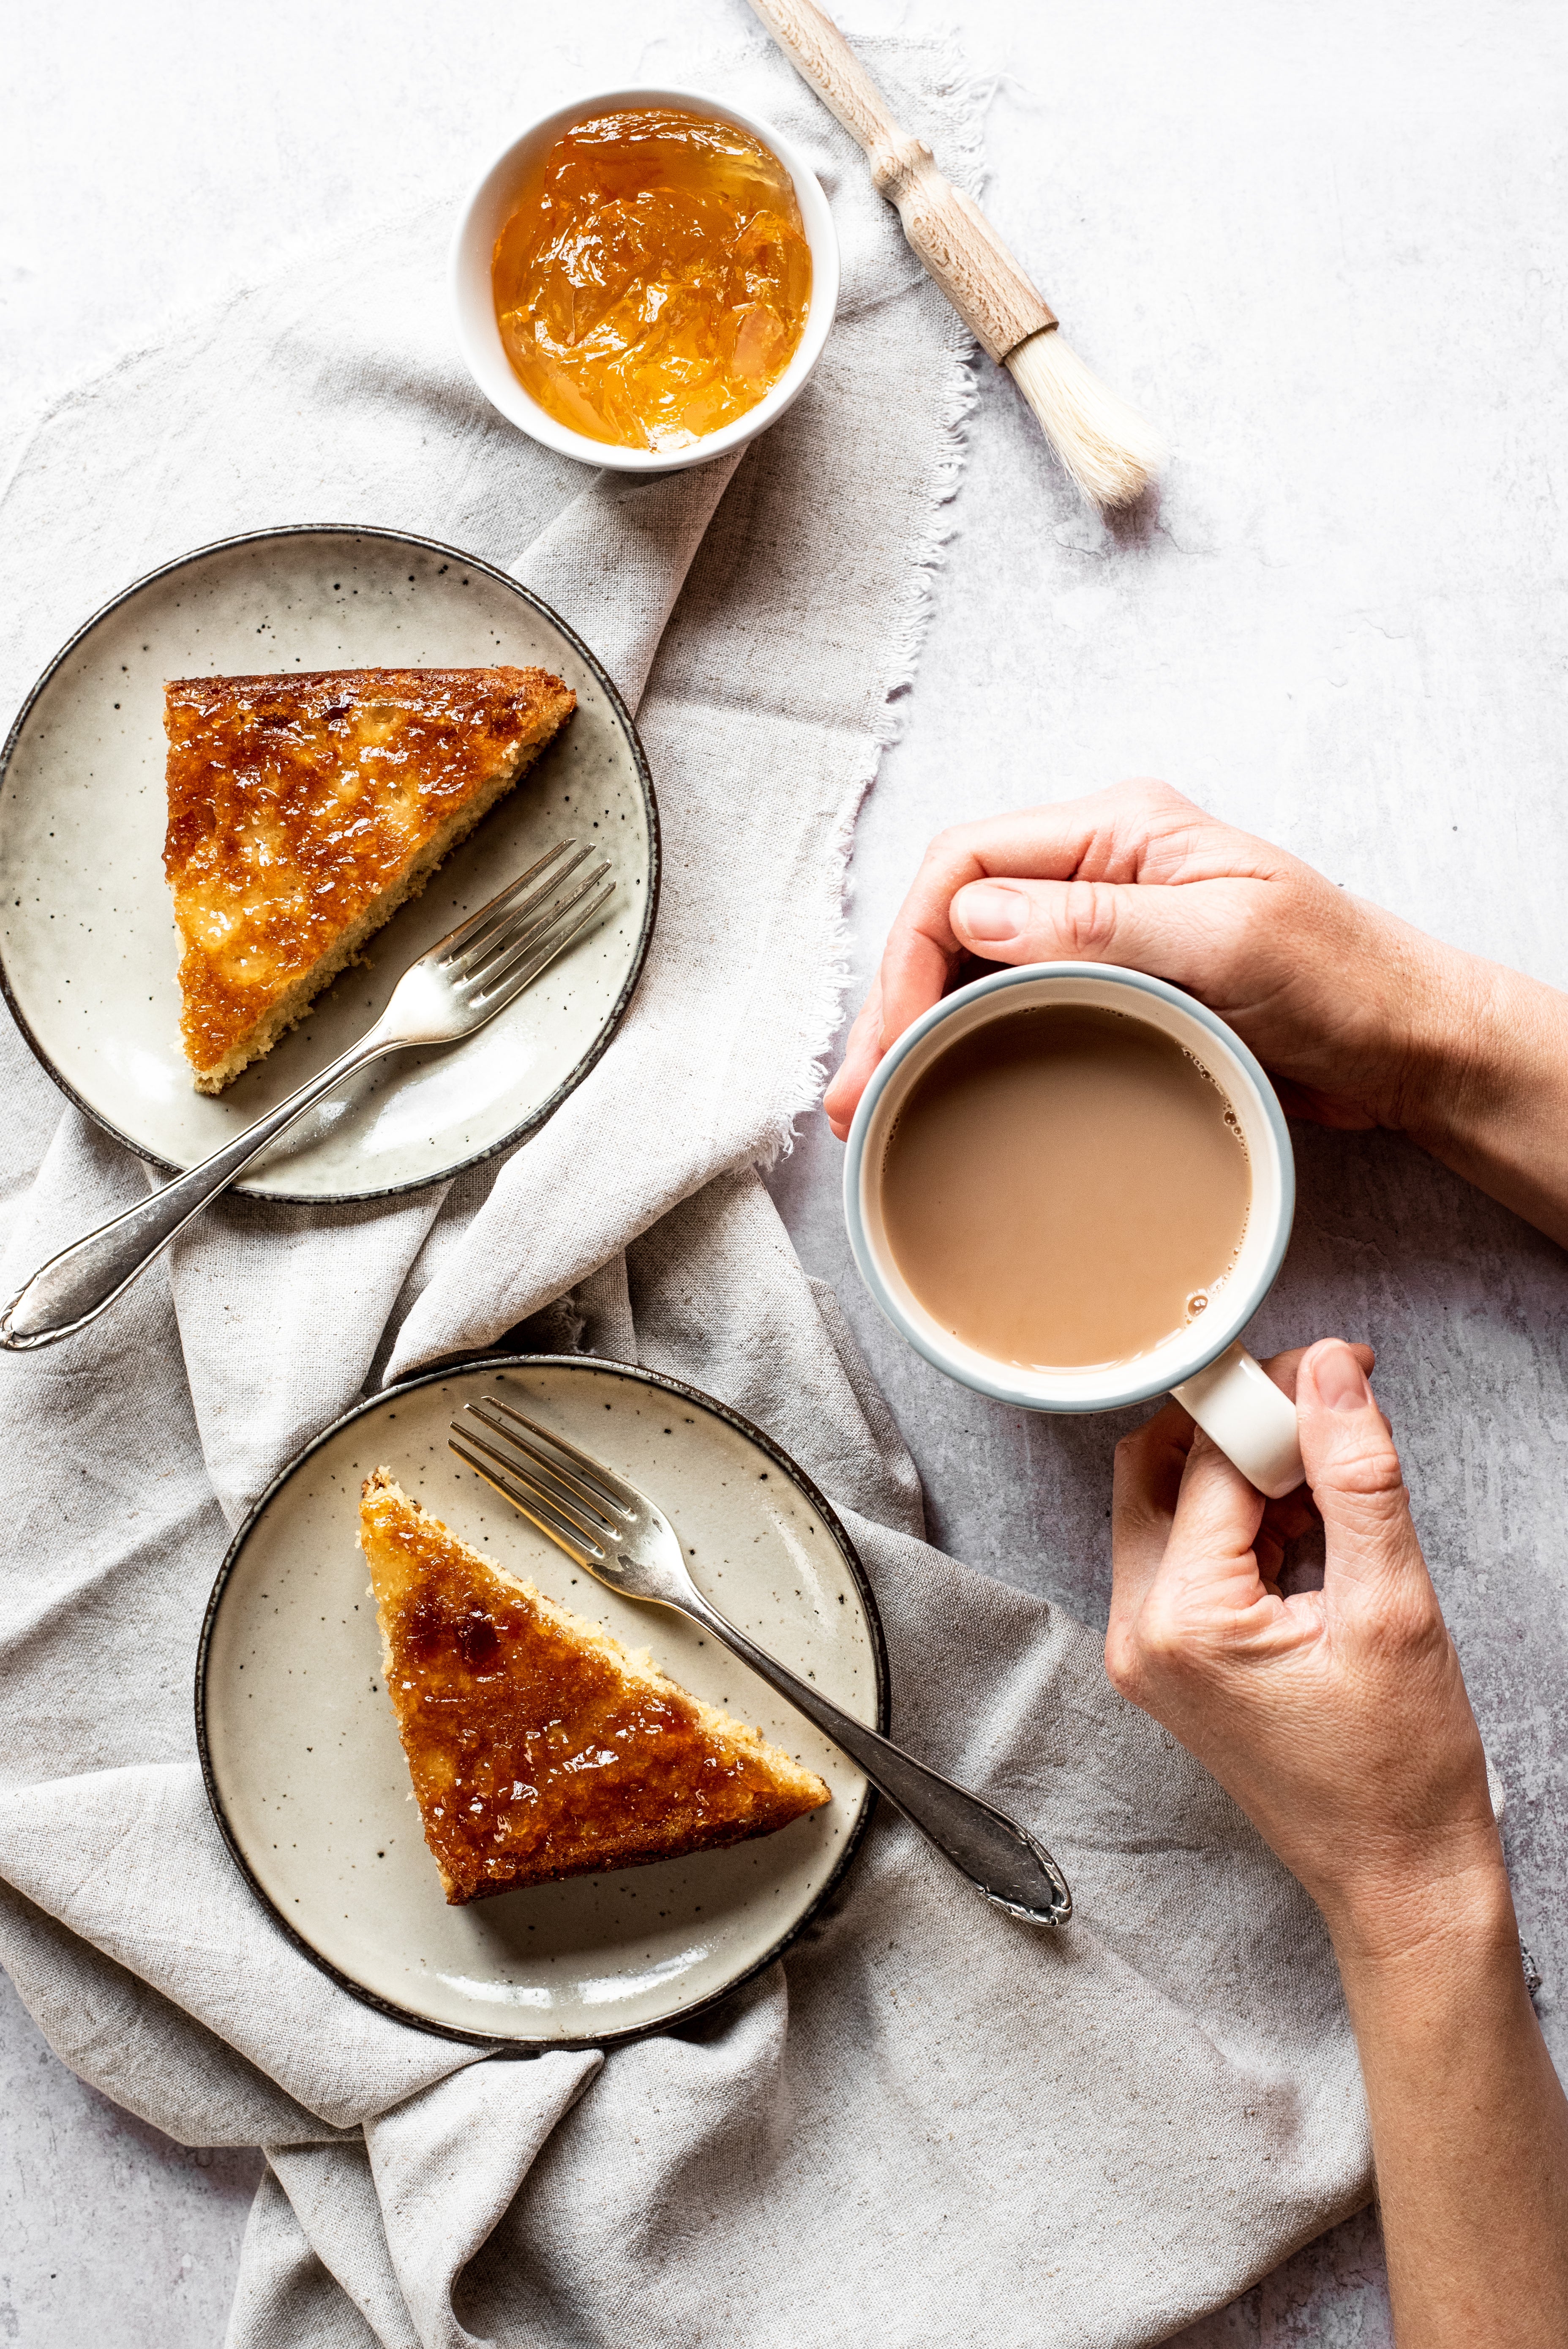 Top view of Marmalade Traybake, served on plates with forks. Plates are lay on top of linen cloths, next to hands holding a mug of tea